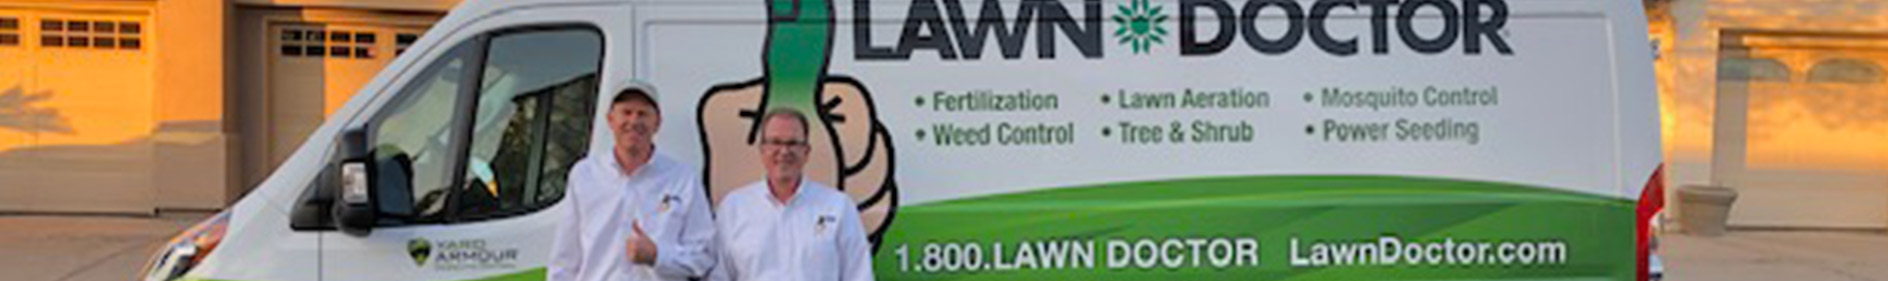 Lawn Doctor Franchise Reviews